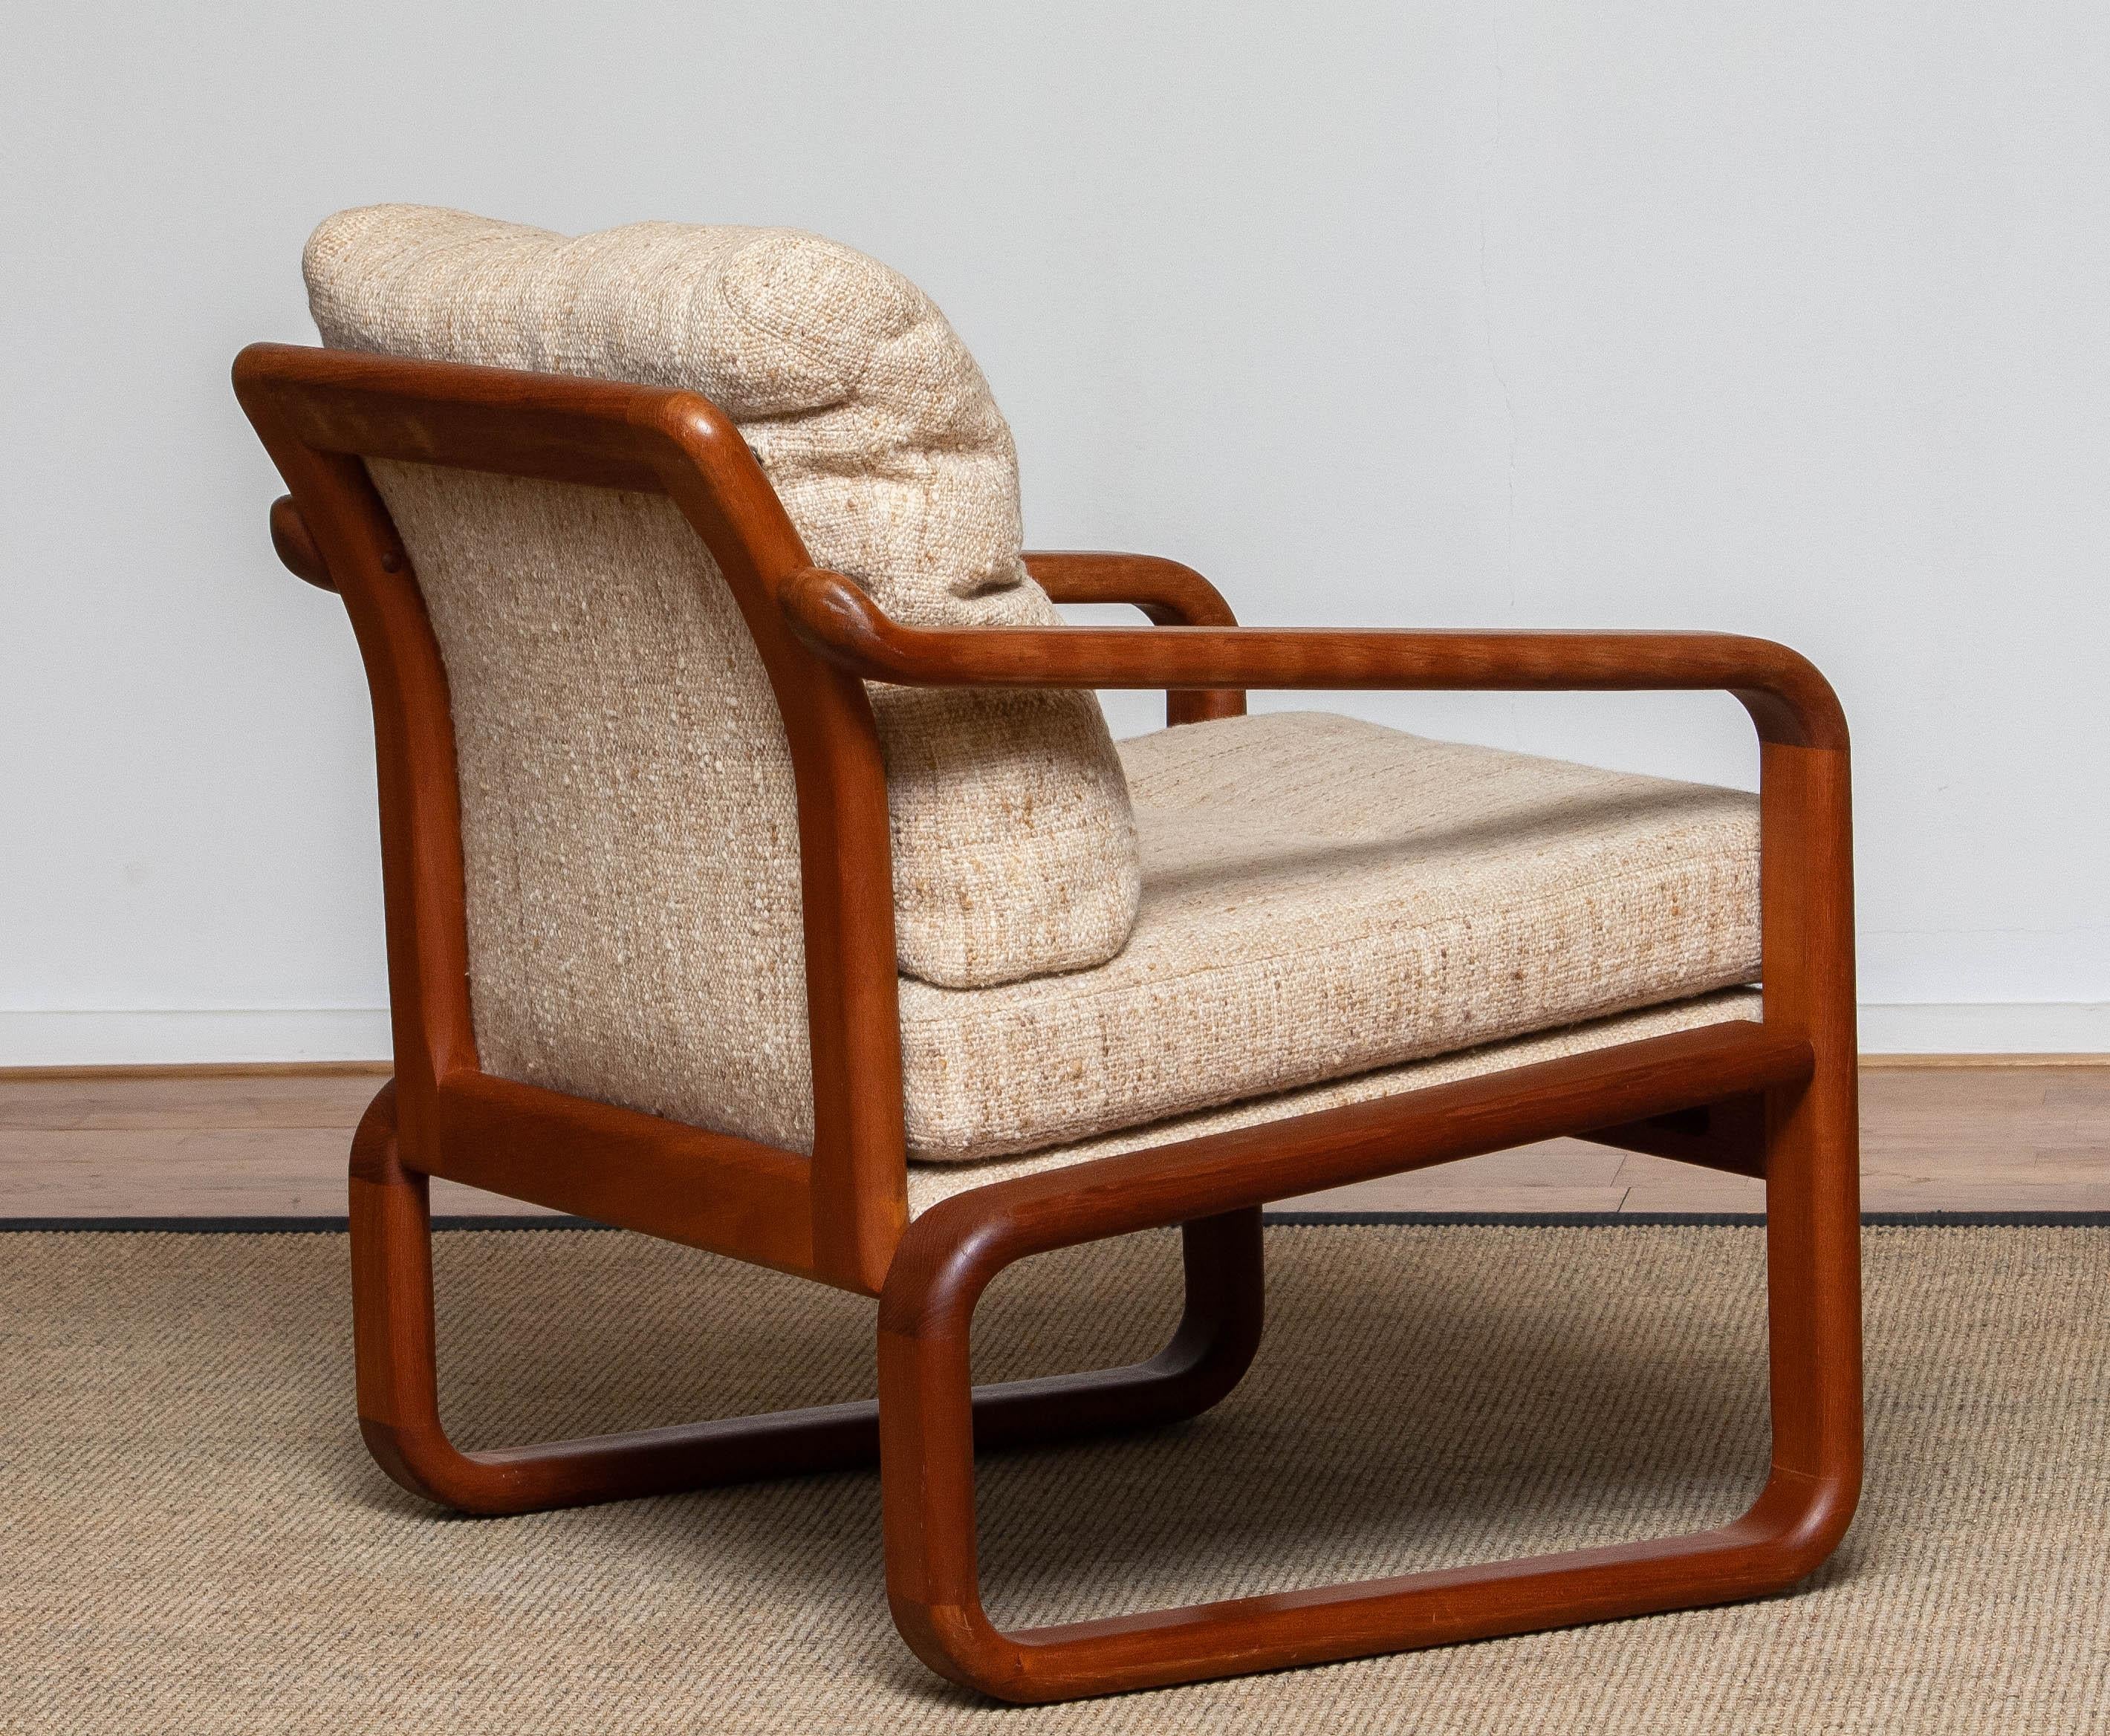 Scandinavian Modern 1980's Teak with Wool Cushions Lounge / Easy / Club Chair by HS Design Denmark For Sale